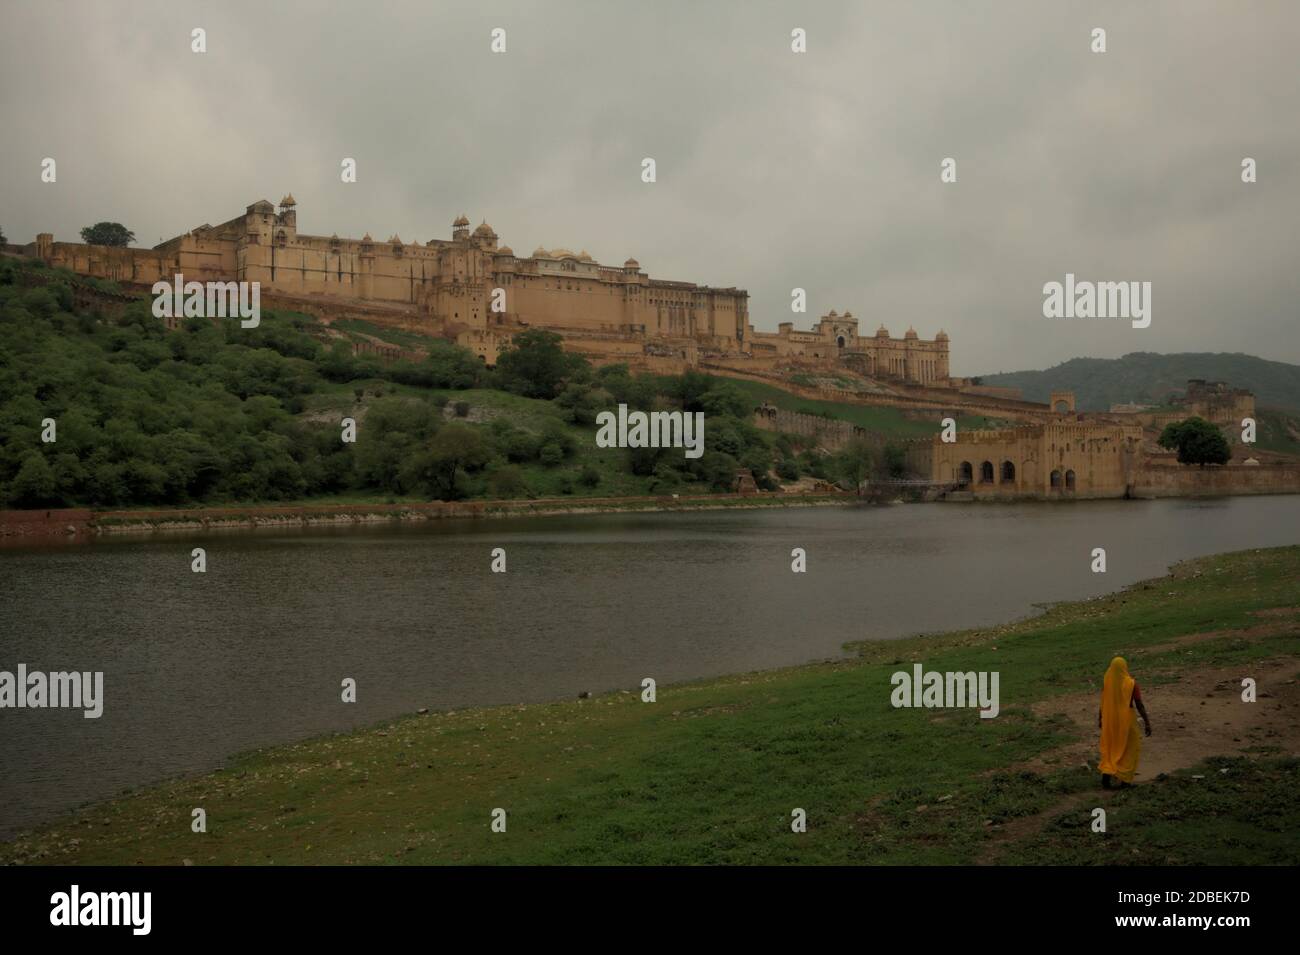 A woman in working dress walking on the side of Maota Lake, overlooking the historic Amer Fort in Amer, Rajasthan, India. Stock Photo